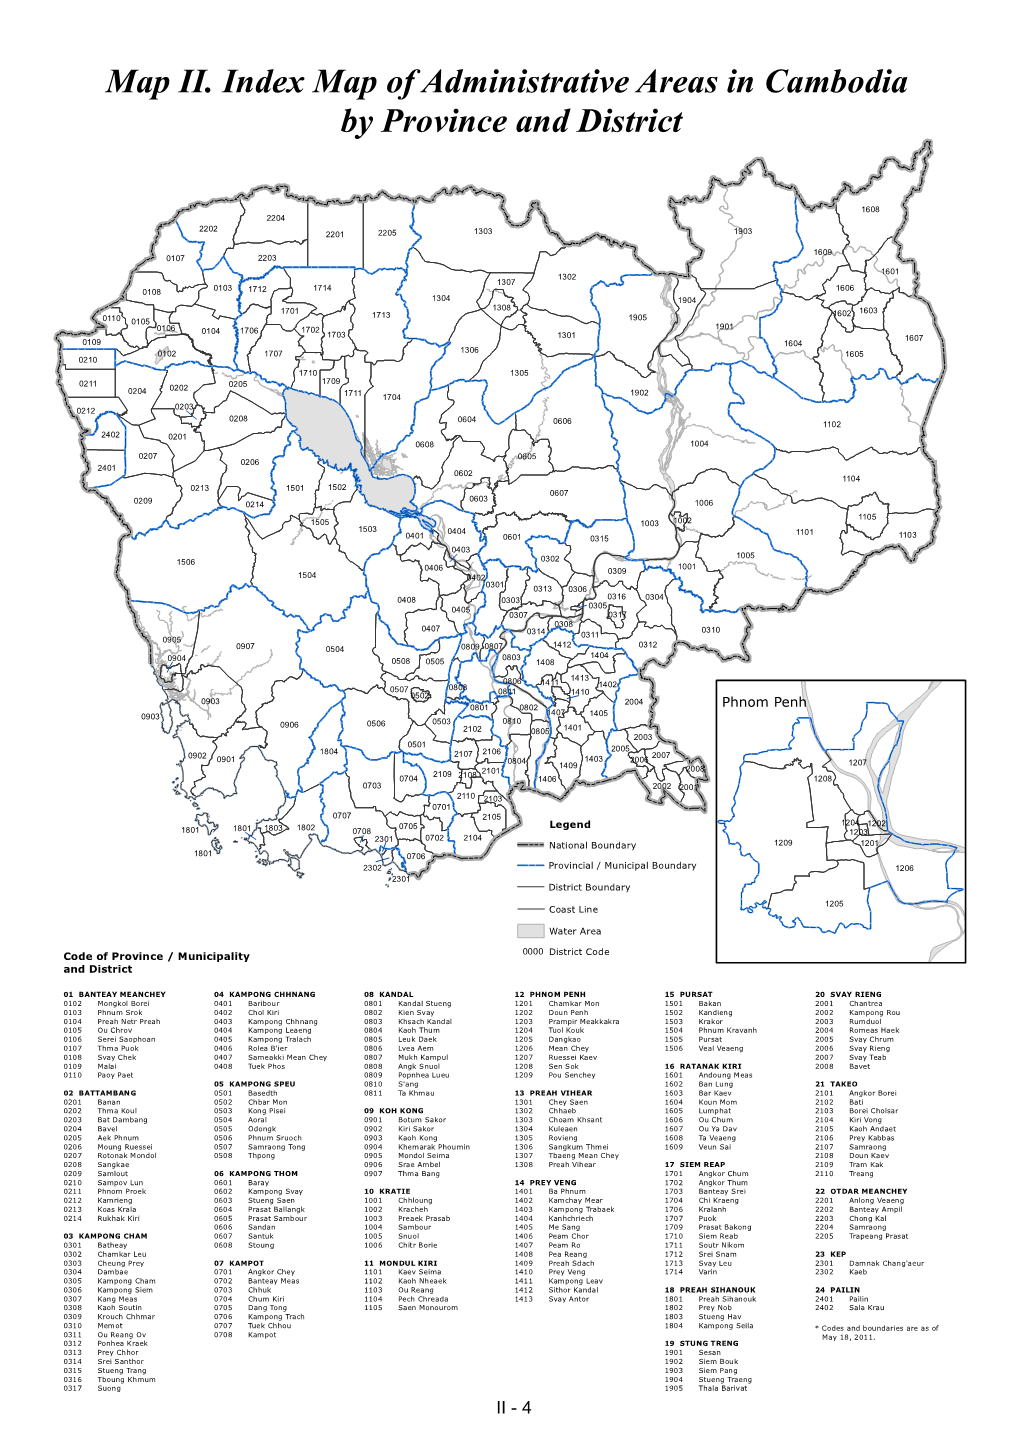 Map II. Index Map of Administrative Areas in Cambodia by Province and District